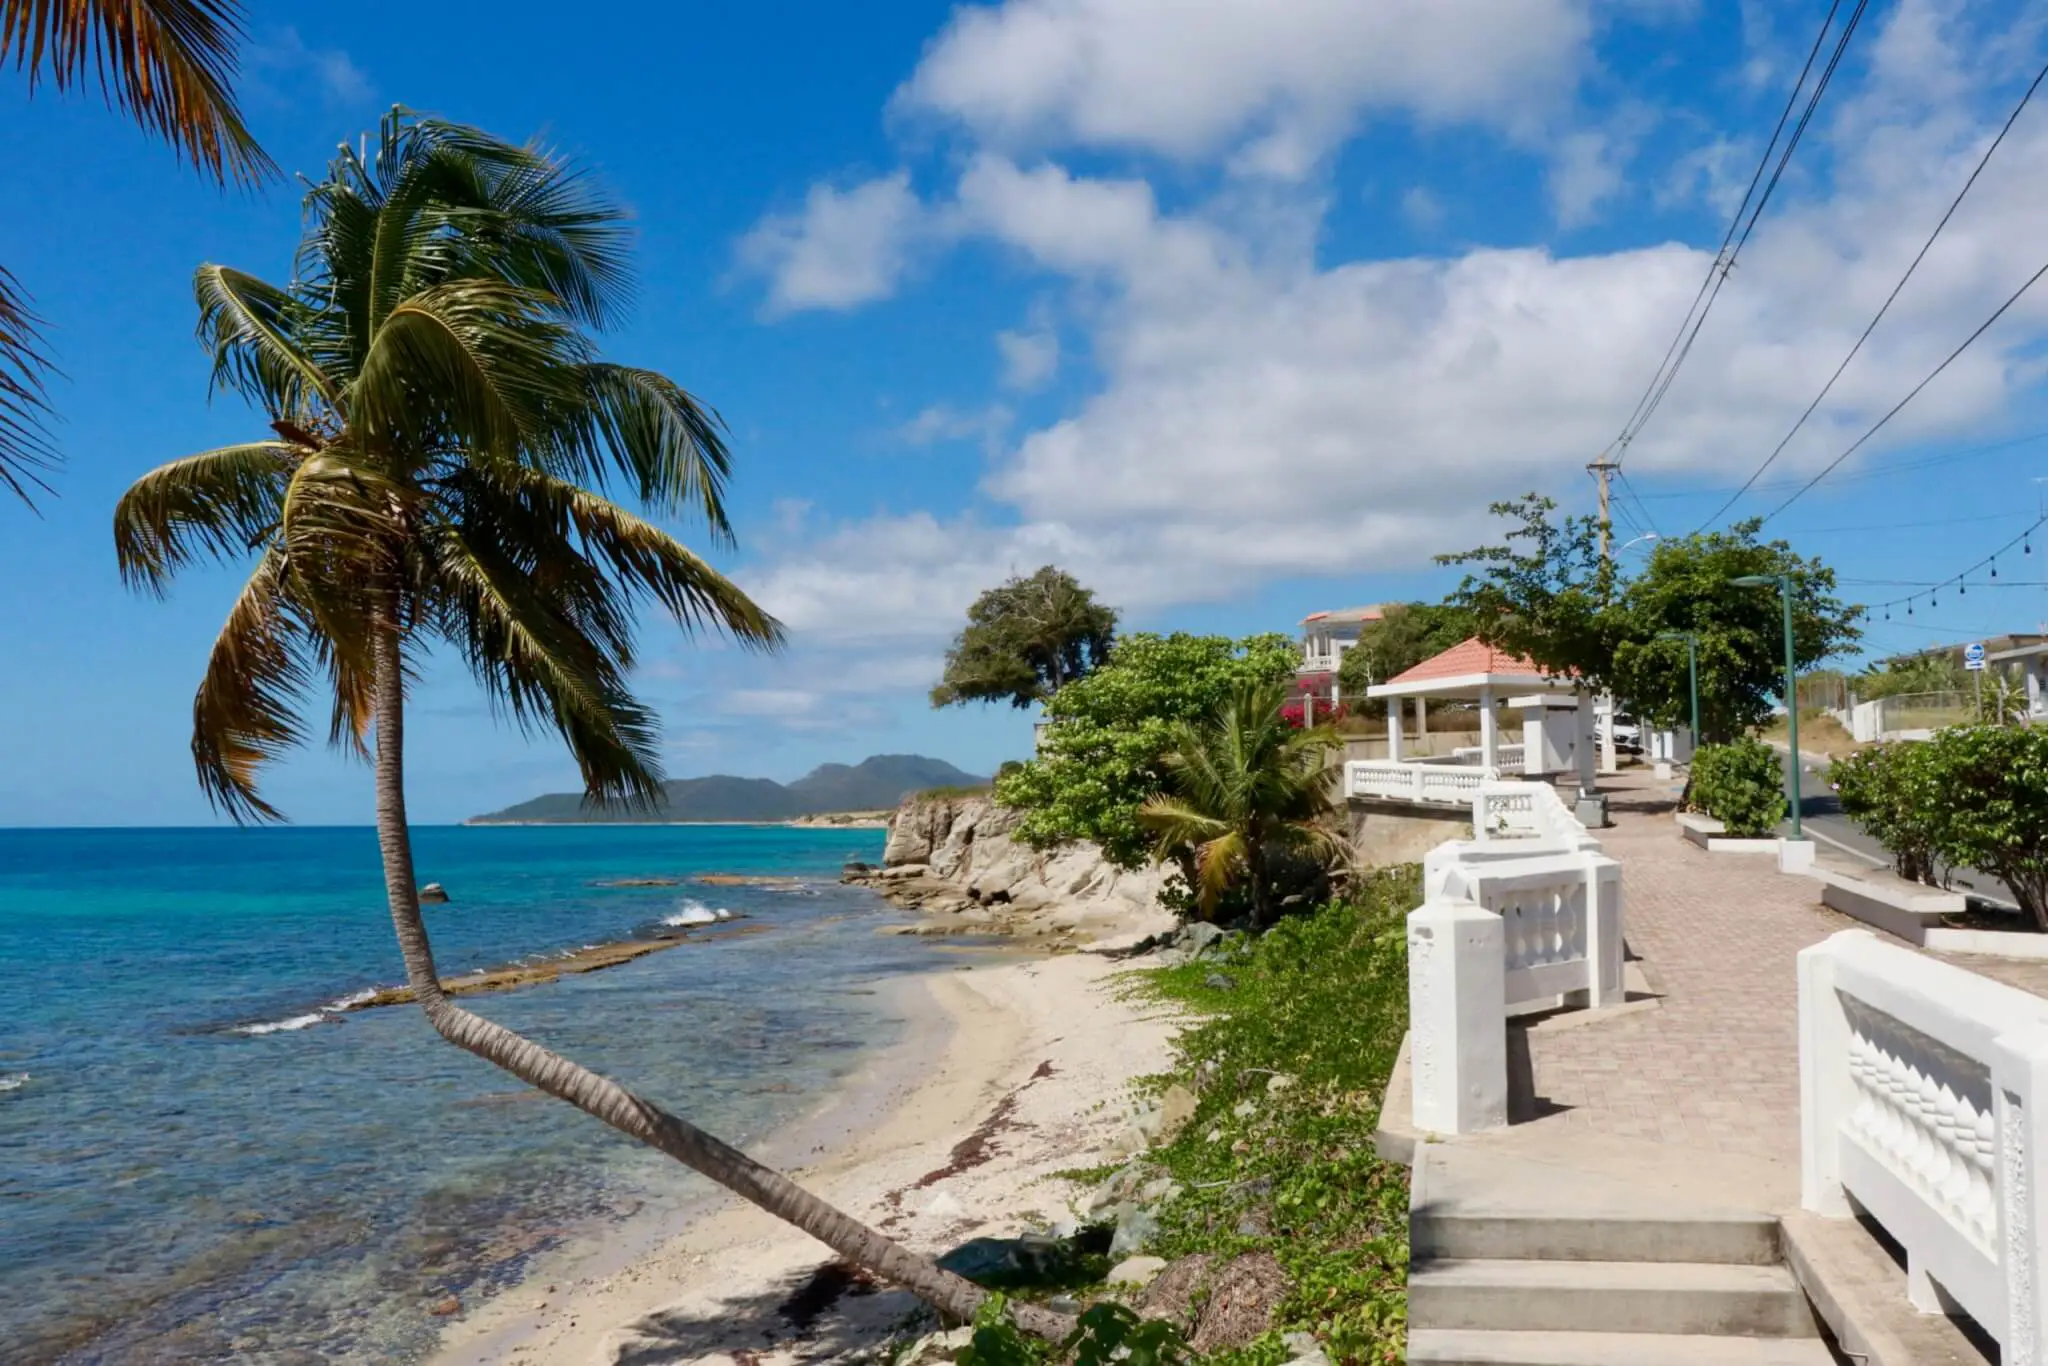 The end of the malecon in Vieques, with palm trees, azure water, and white concrete railing